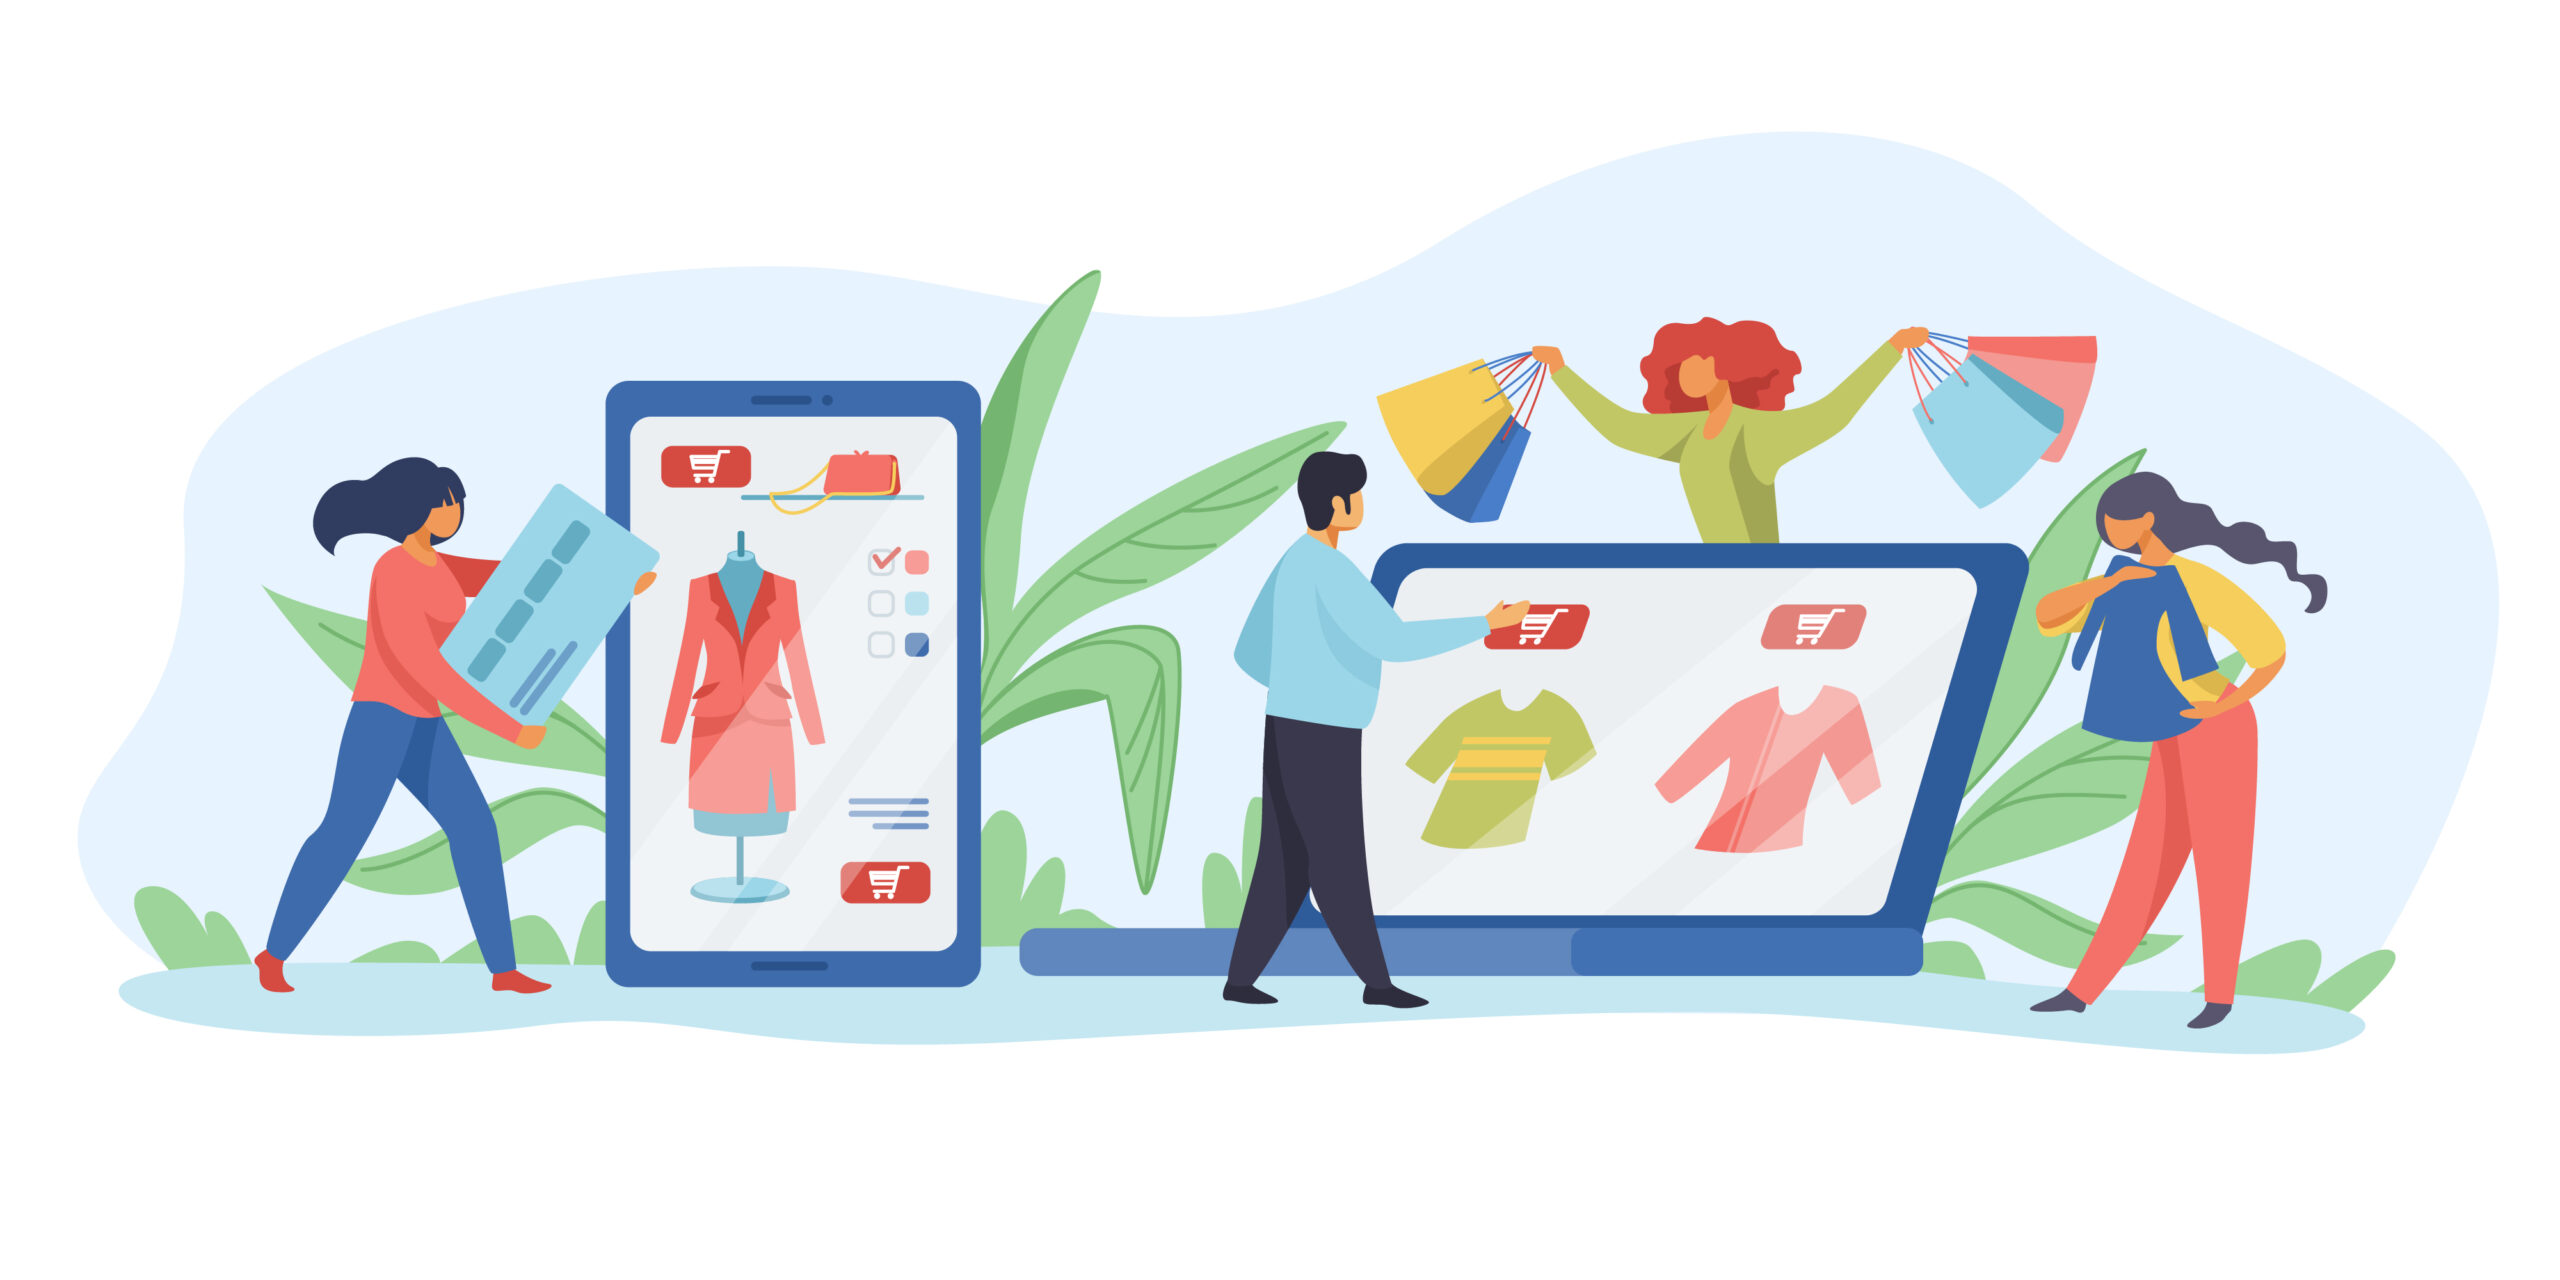 What is Headless Commerce